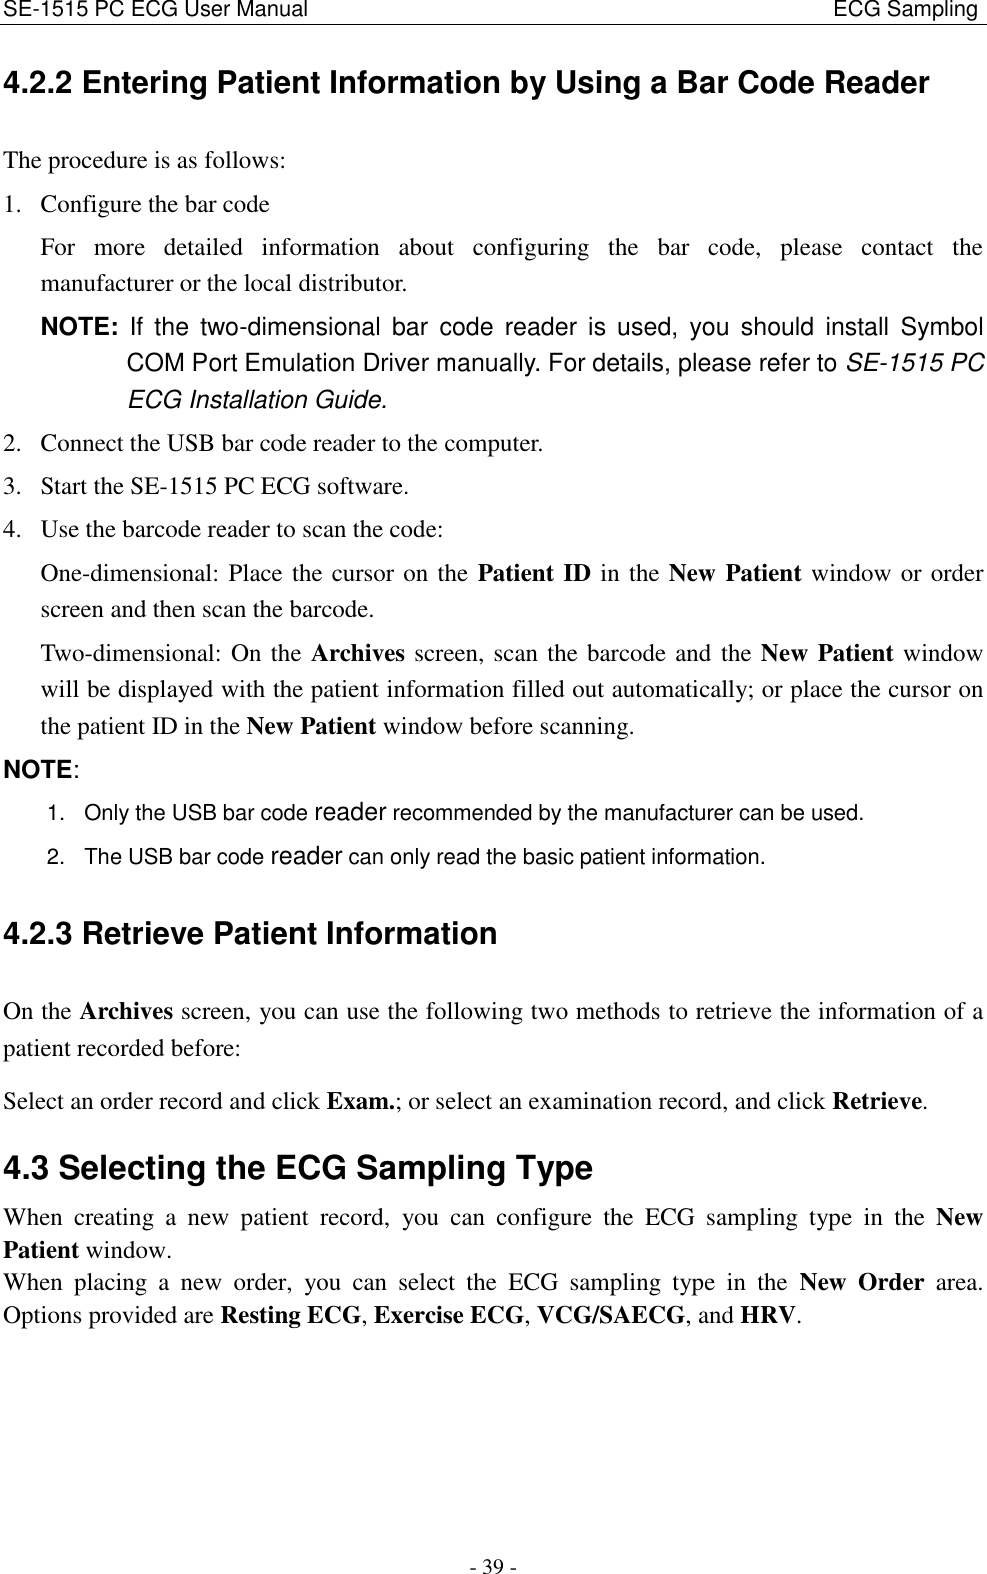 SE-1515 PC ECG User Manual                                                                                              ECG Sampling - 39 - 4.2.2 Entering Patient Information by Using a Bar Code Reader The procedure is as follows: 1. Configure the bar code For  more  detailed  information  about  configuring  the  bar  code,  please  contact  the manufacturer or the local distributor. NOTE:  If the  two-dimensional  bar  code  reader  is  used,  you  should  install  Symbol COM Port Emulation Driver manually. For details, please refer to SE-1515 PC ECG Installation Guide. 2. Connect the USB bar code reader to the computer. 3. Start the SE-1515 PC ECG software. 4. Use the barcode reader to scan the code: One-dimensional: Place the cursor on the Patient ID in the New Patient window or order screen and then scan the barcode. Two-dimensional: On the Archives screen, scan the barcode and the New Patient window will be displayed with the patient information filled out automatically; or place the cursor on the patient ID in the New Patient window before scanning.   NOTE: 1.  Only the USB bar code reader recommended by the manufacturer can be used. 2.  The USB bar code reader can only read the basic patient information. 4.2.3 Retrieve Patient Information On the Archives screen, you can use the following two methods to retrieve the information of a patient recorded before: Select an order record and click Exam.; or select an examination record, and click Retrieve. 4.3 Selecting the ECG Sampling Type When  creating  a  new  patient  record,  you  can  configure  the  ECG  sampling  type  in  the  New Patient window.   When  placing  a  new  order,  you  can  select  the  ECG  sampling  type  in  the  New  Order  area.   Options provided are Resting ECG, Exercise ECG, VCG/SAECG, and HRV. 